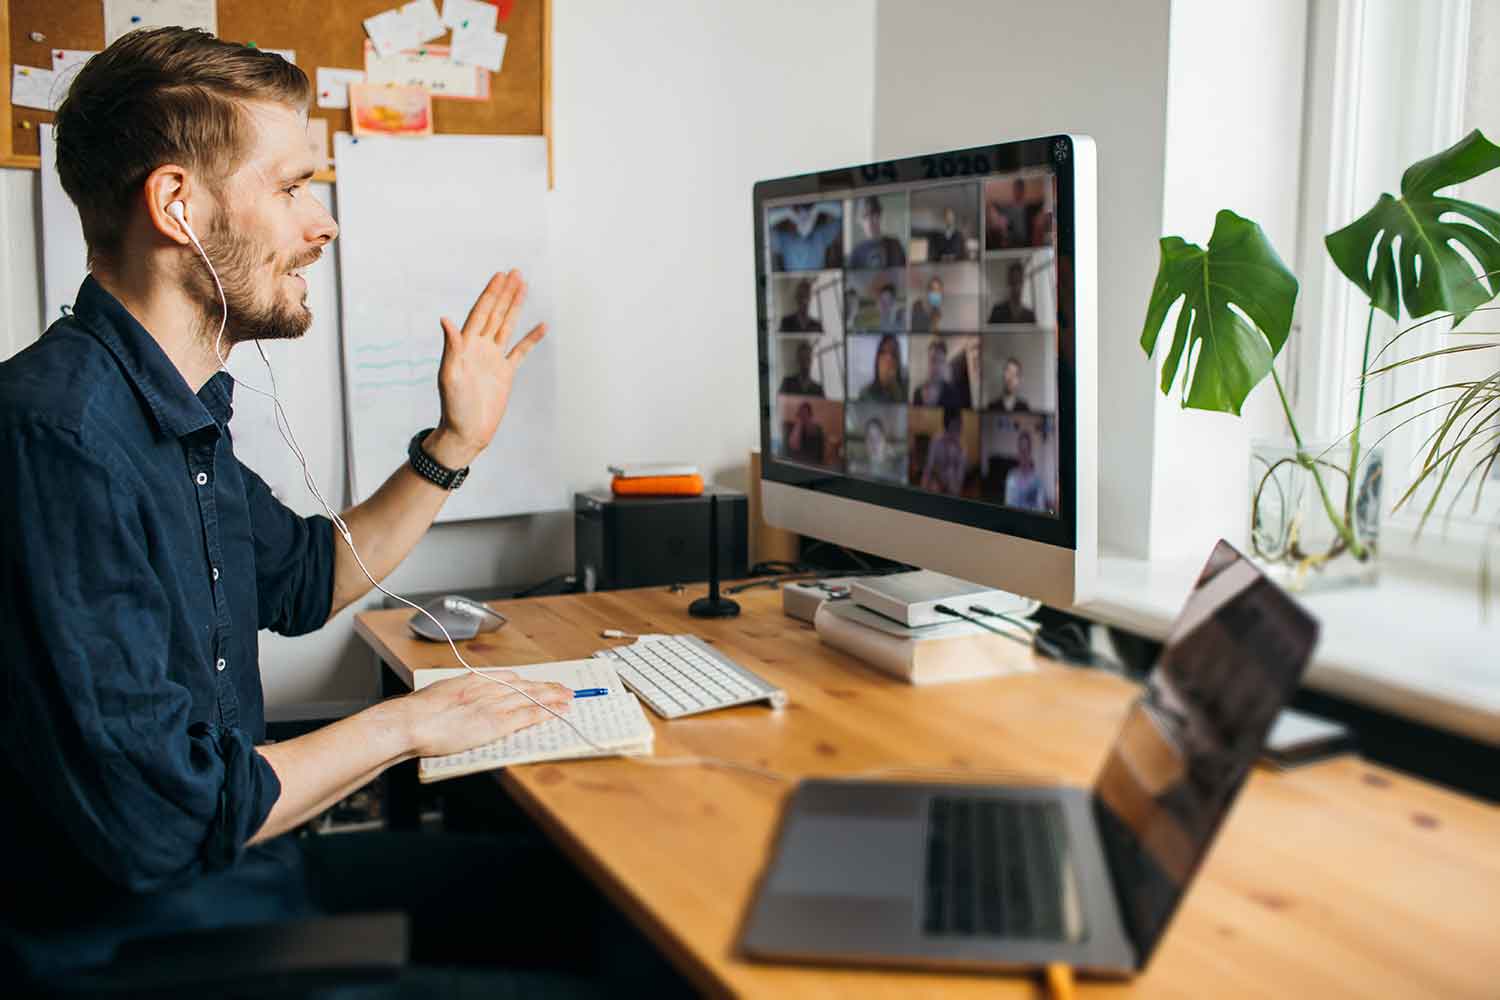 How to Run a Great Virtual Meeting at Home - by Elva Young - Tips towards  effective meetings and presentations from home office during the COVID time  - UX Collective